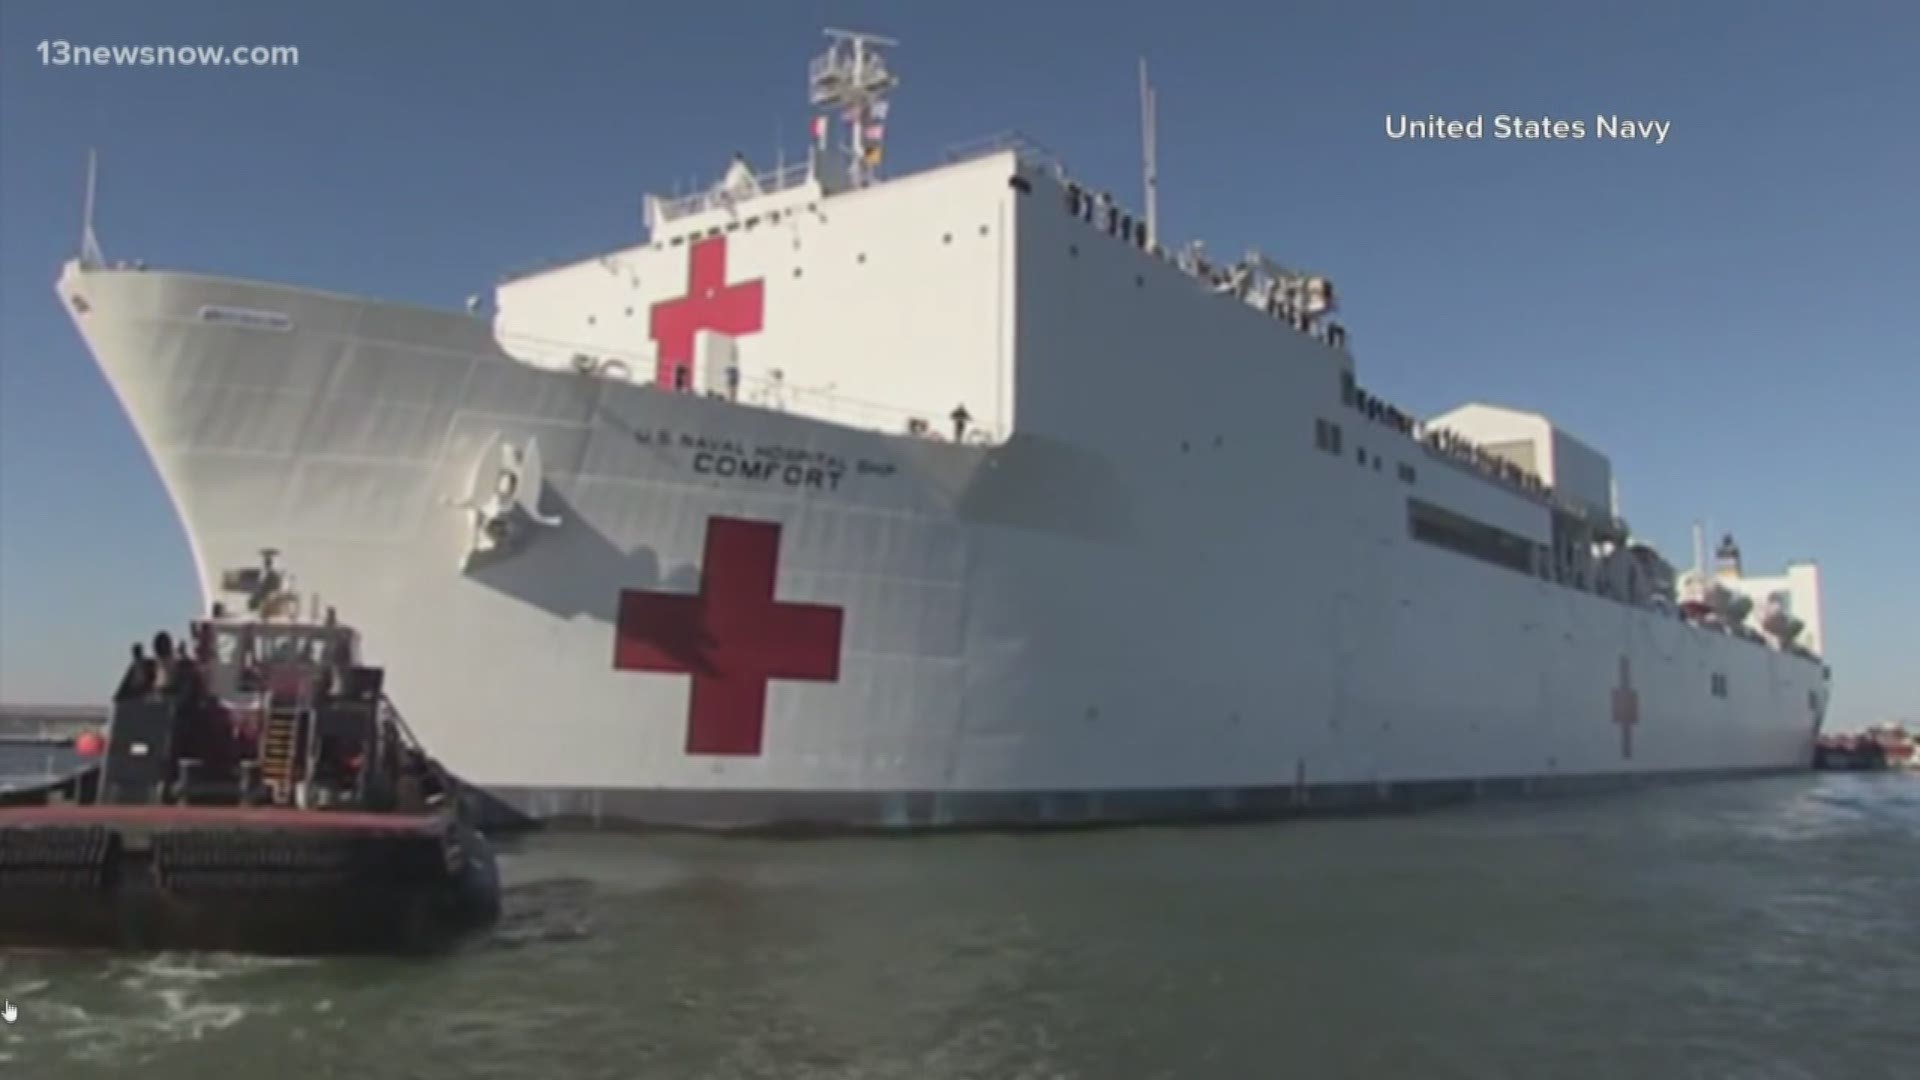 Hospital ship will bring 1,000 hospital beds to pandemic epicenter.